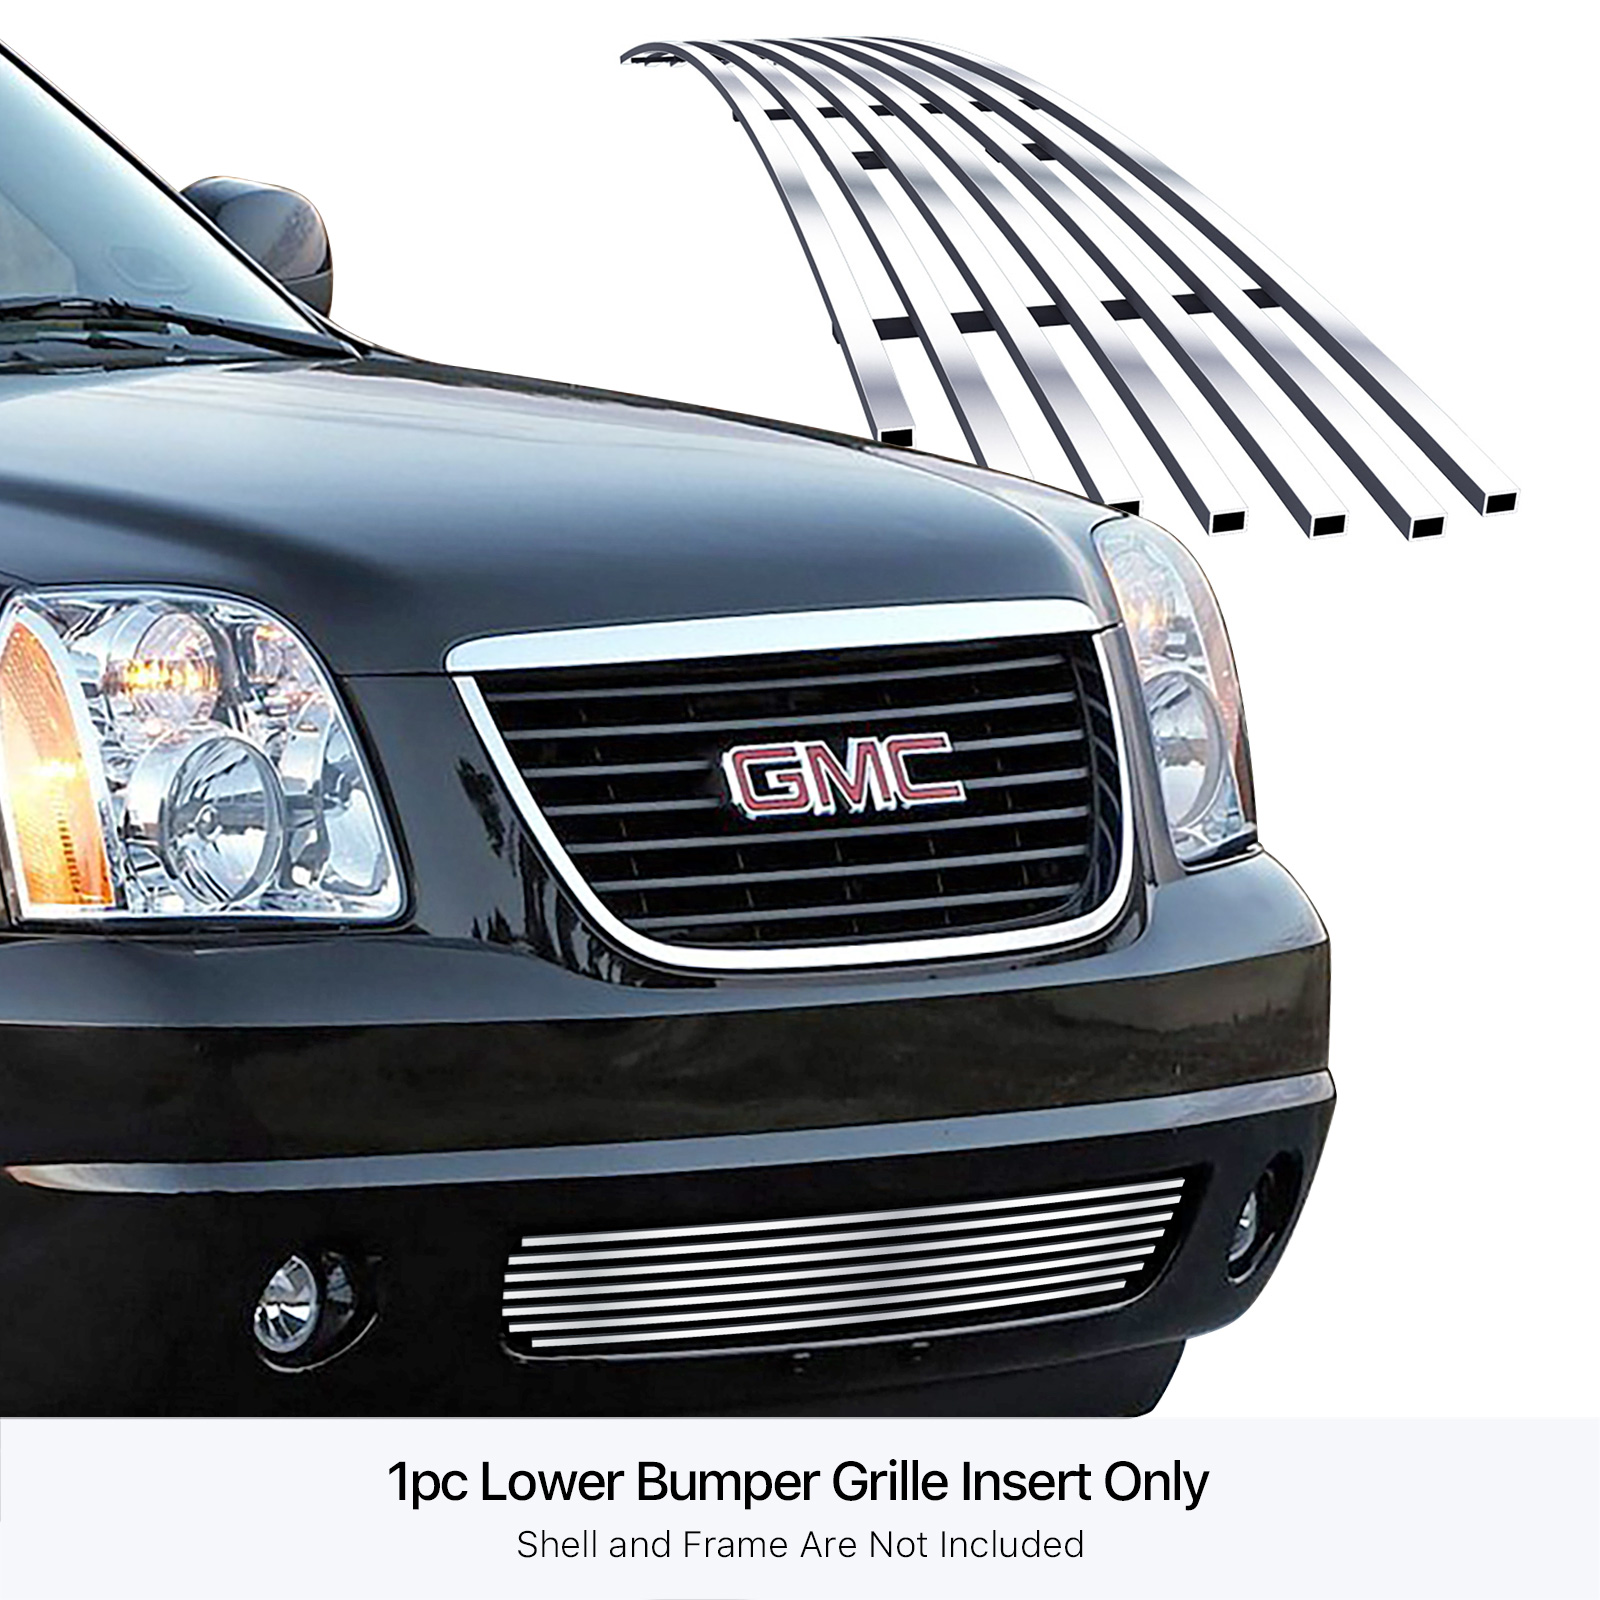 2007-2014 GMC Yukon XL Tow Hook Covered Not For Hybrid Model/2007-2014 GMC Yukon Tow Hook Covered Not For Hybrid Model LOWER BUMPER Stainless Steel Billet Grille